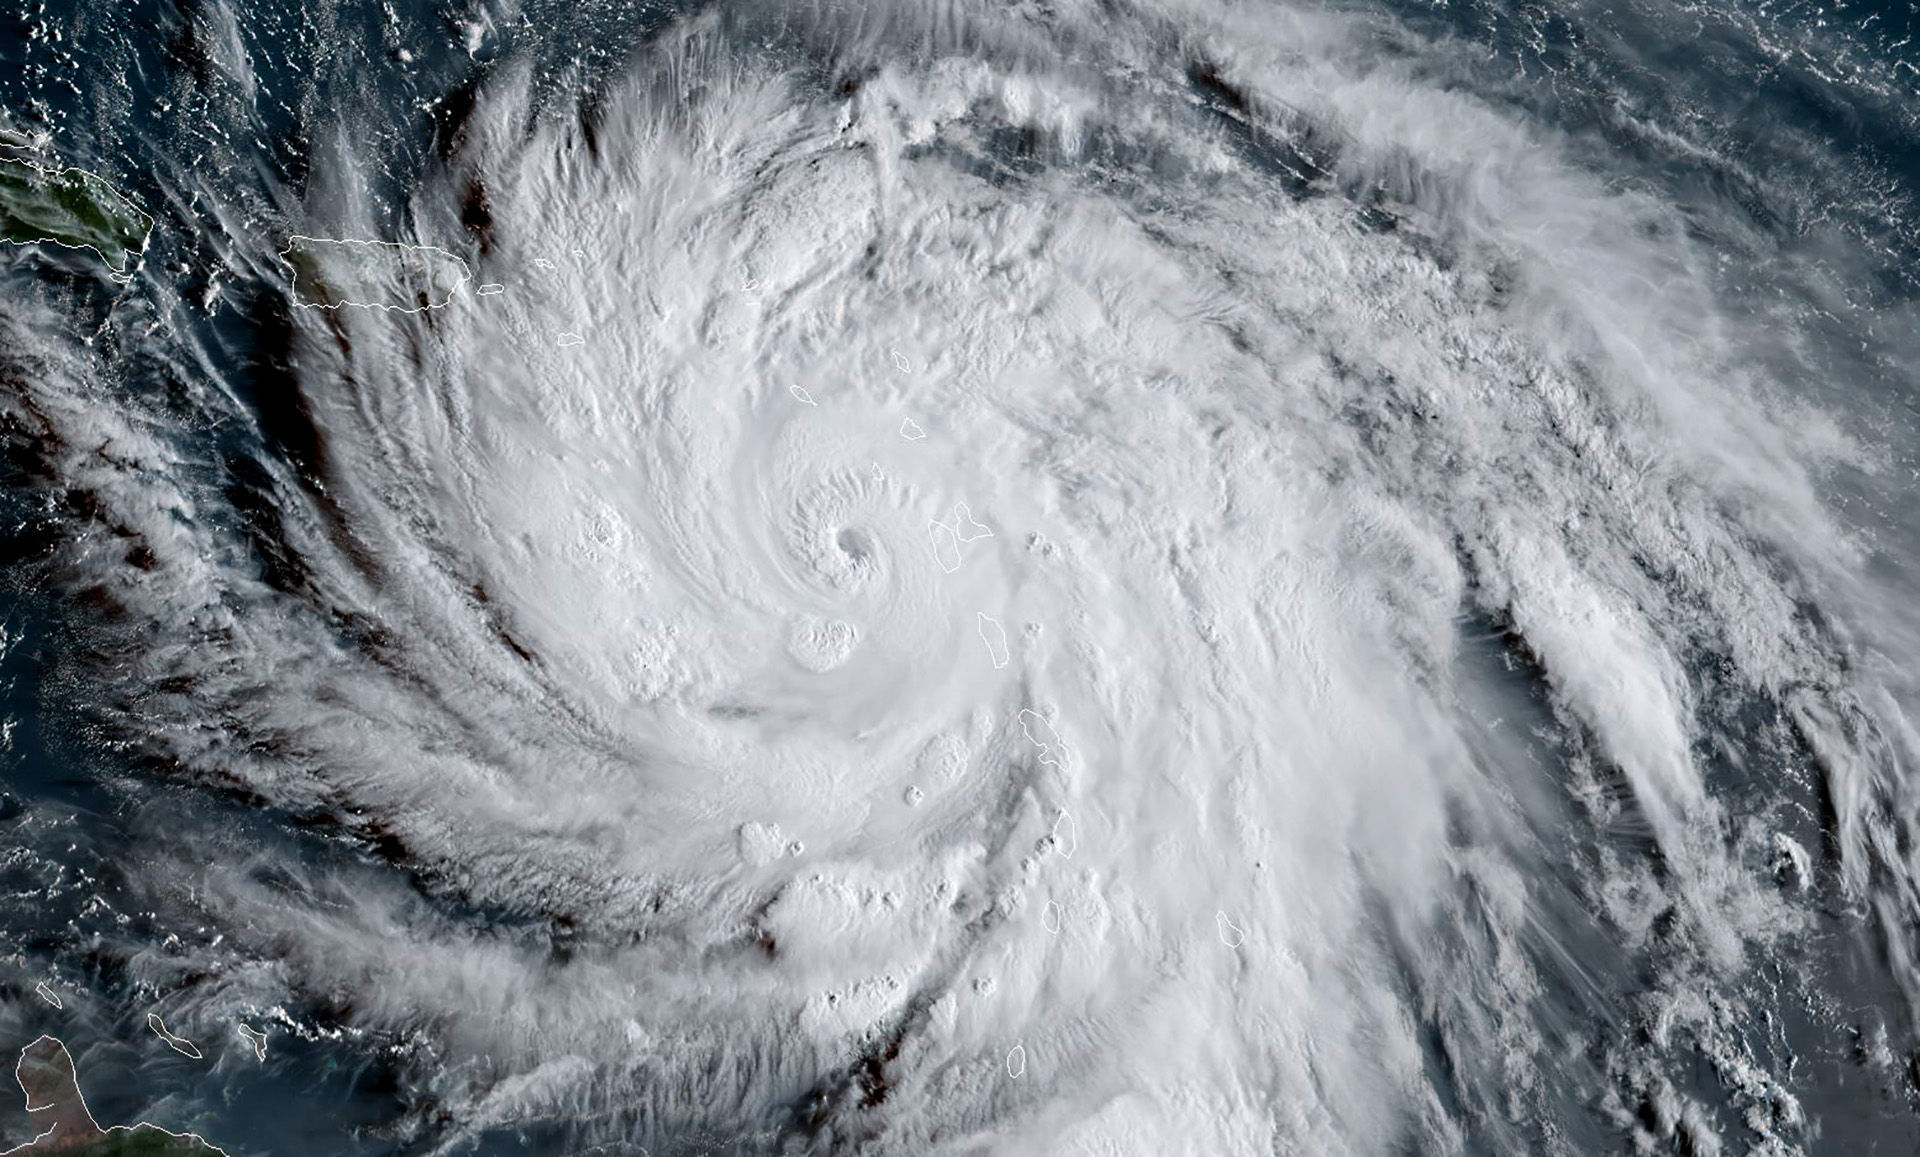 This satellite image obtained from the National Oceanic and Atmospheric Administration (NOAA) shows Hurricane Maria at 1130 UTC on September 19, 2017. Maria hit the eastern Caribbean island of Dominica on Tuesday, with its prime minister describing devastating damage as winds and rain from the powerful storm also hit territories still reeling from Irma. As residents hunkered down in their homes the Category Five hurricane made landfall with top winds swirling at 160mph (257kph), the US National Hurricane Center said. / AFP PHOTO / NOAA/RAMMB / Jose ROMERO / RESTRICTED TO EDITORIAL USE - MANDATORY CREDIT "AFP PHOTO / NOAA/RAMMB" - NO MARKETING NO ADVERTISING CAMPAIGNS - DISTRIBUTED AS A SERVICE TO CLIENTS